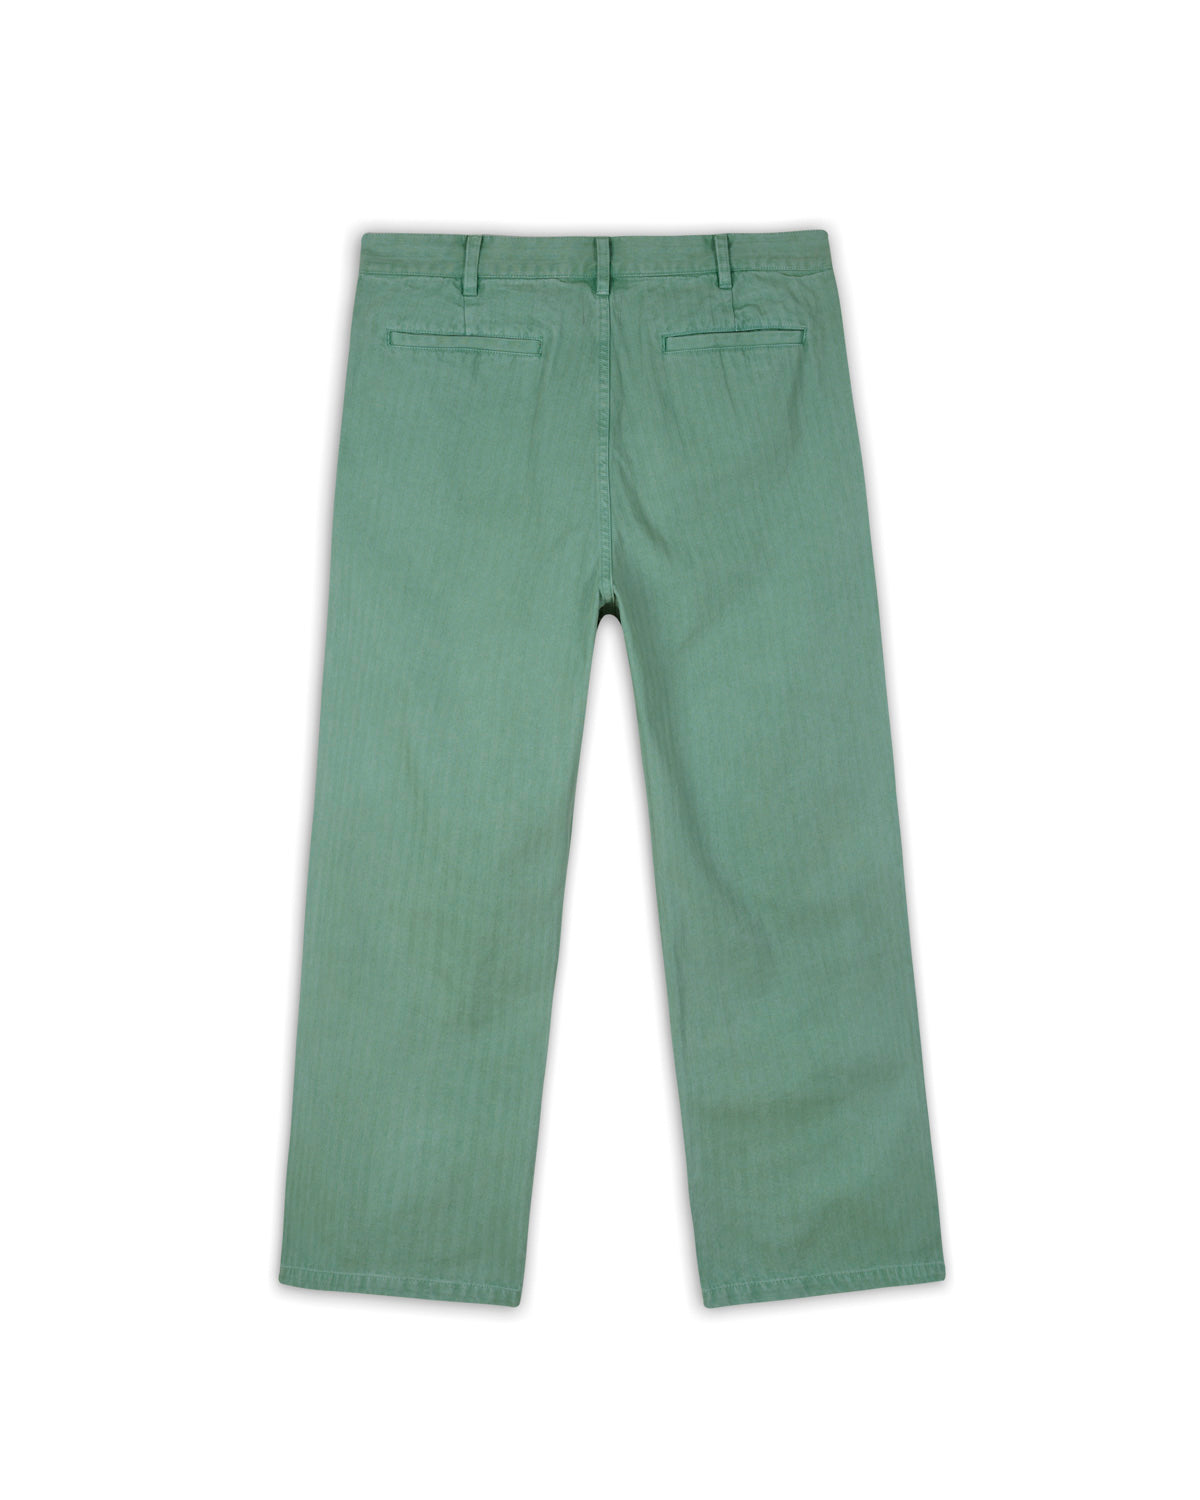 Connections Herringbone Pant - Putty 2